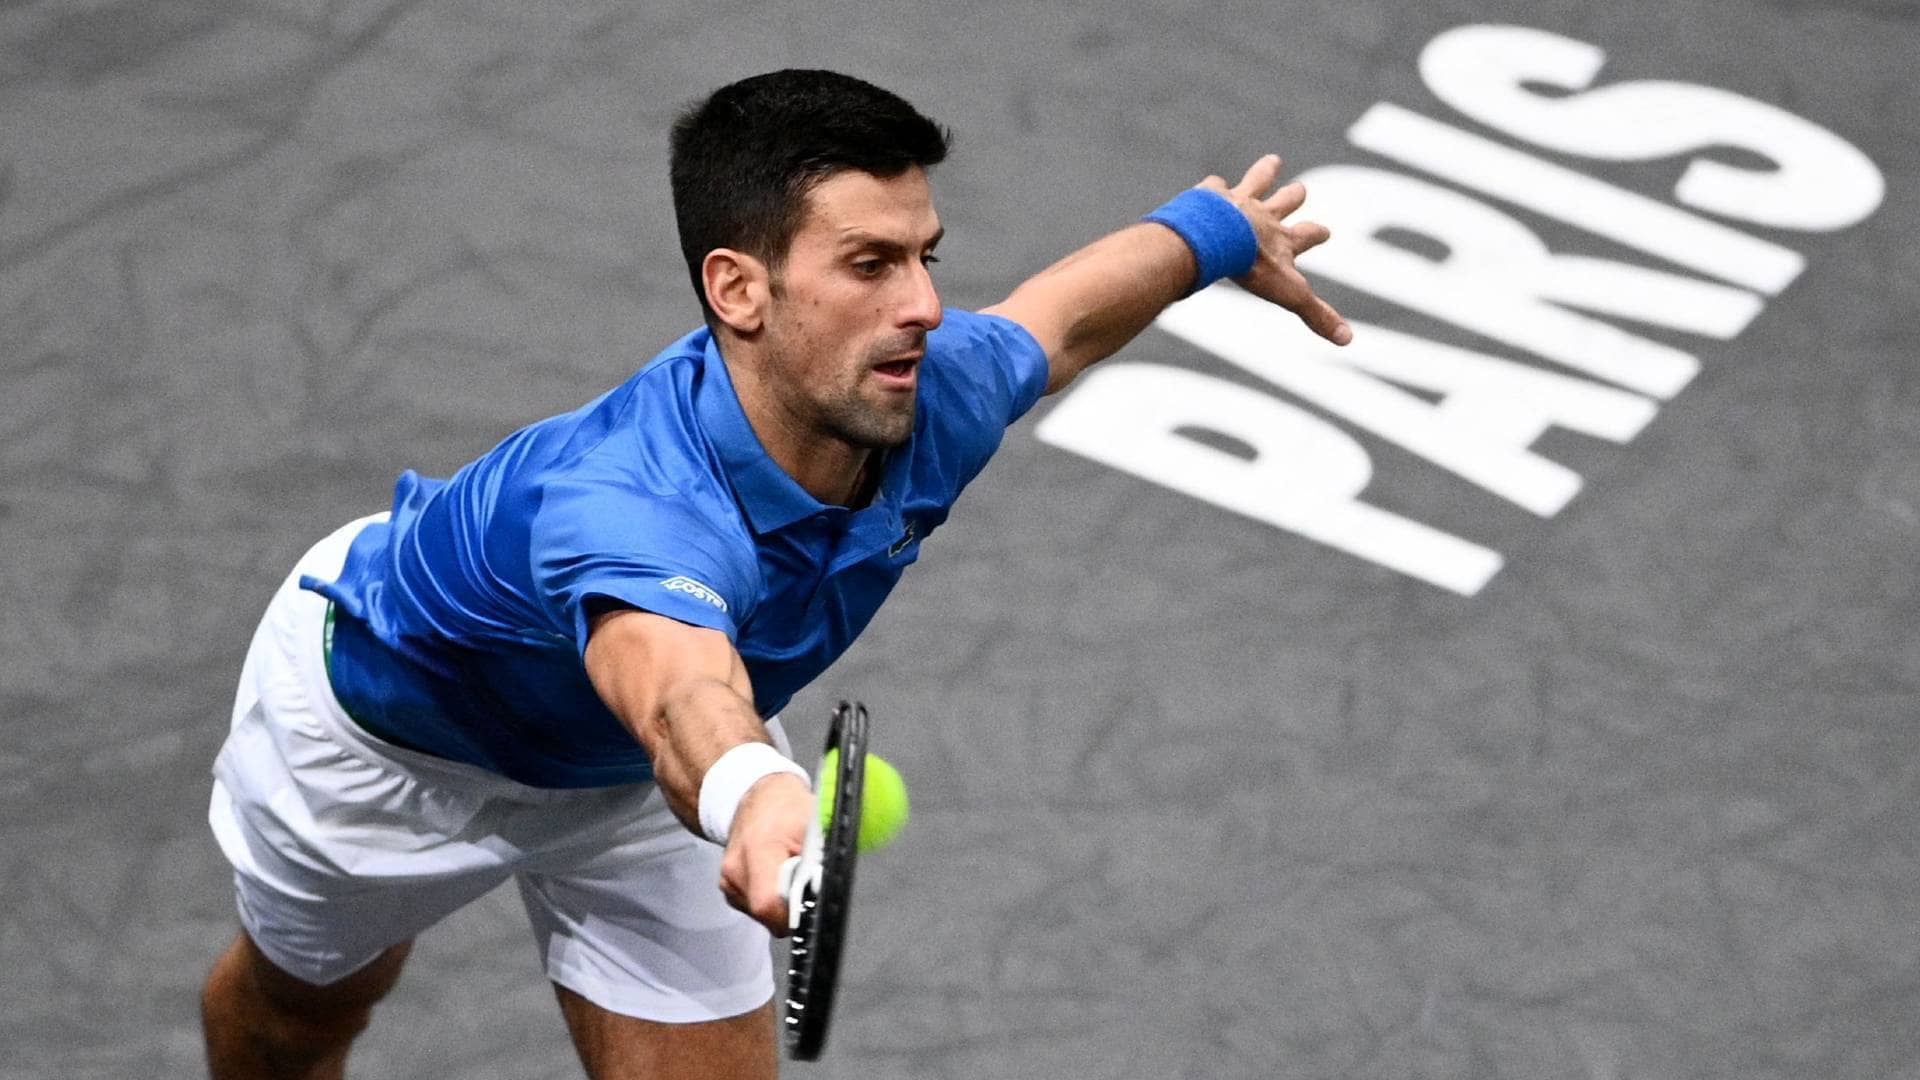 Novak Djokovic records his 10th straight win at the Rolex Paris Masters following title runs in 2019 and 2021.